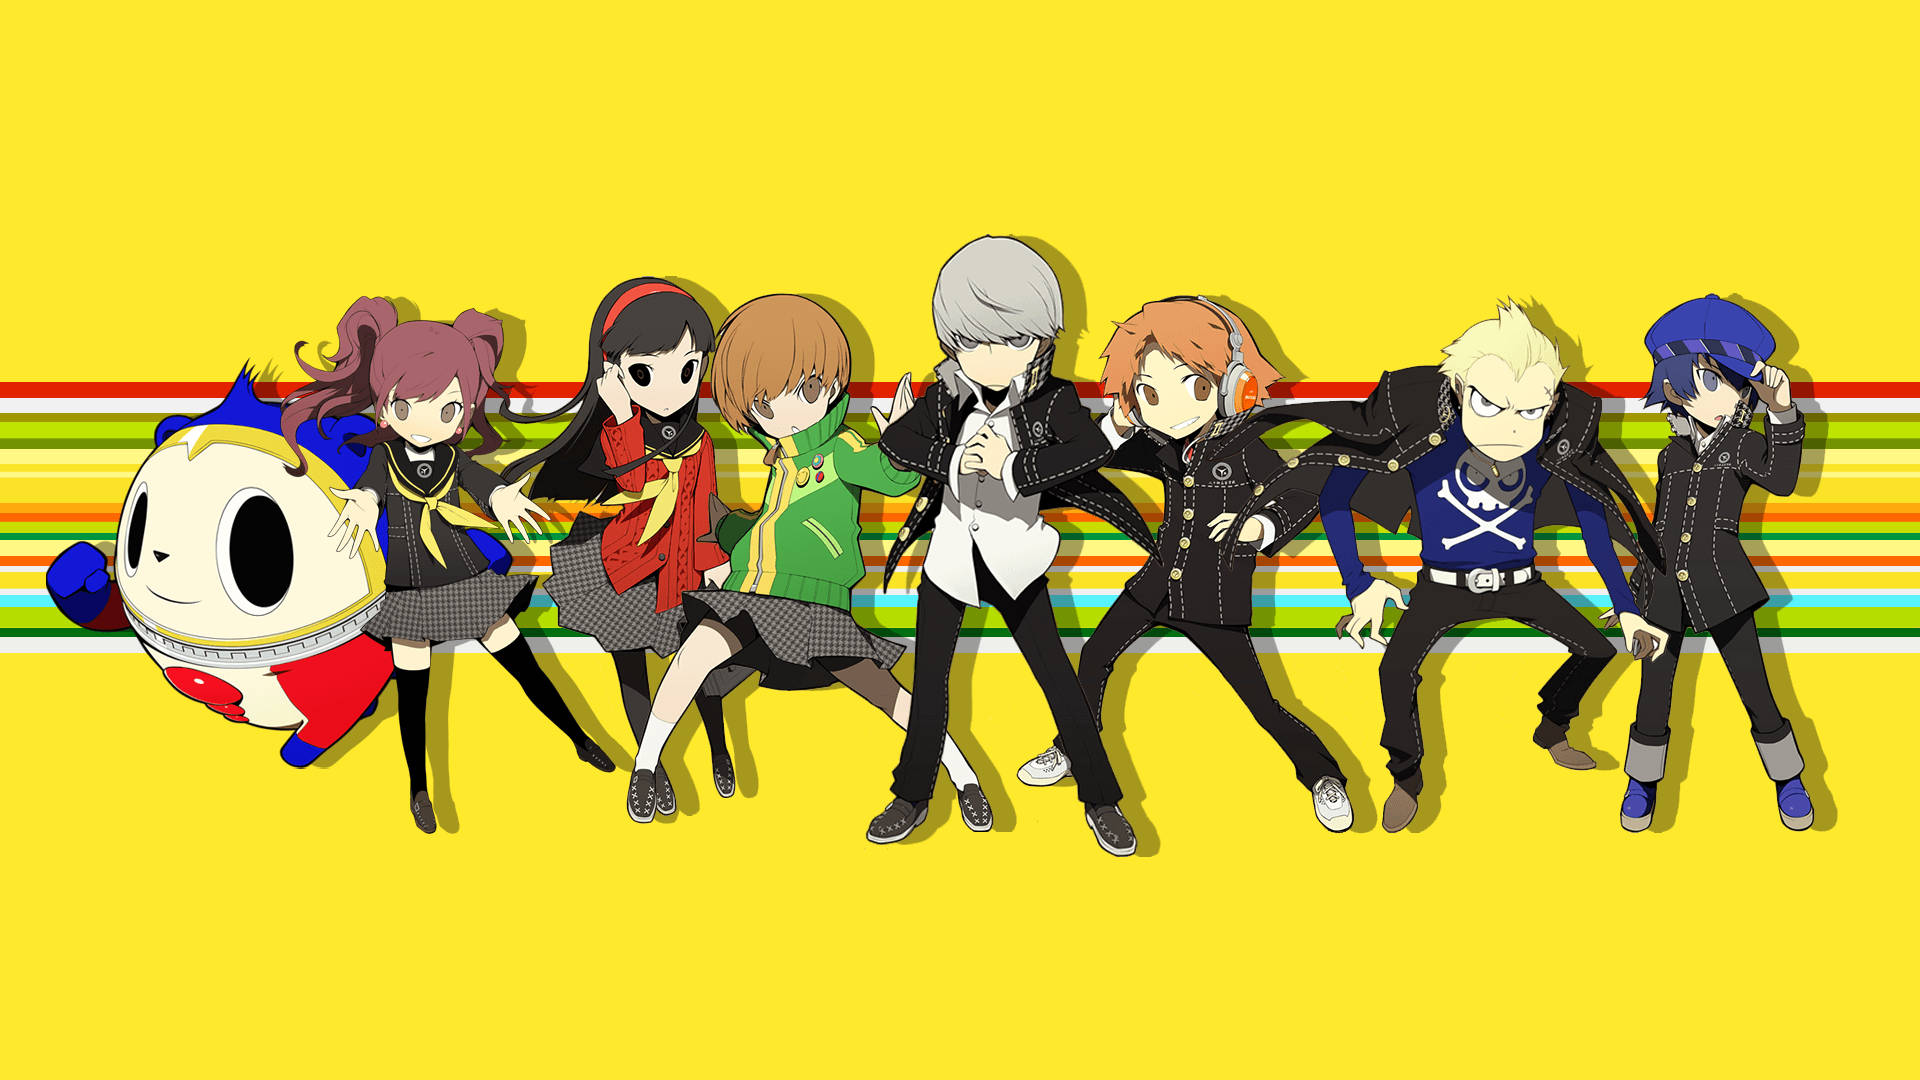 Join the Investigation Team – Play Persona 4 Wallpaper